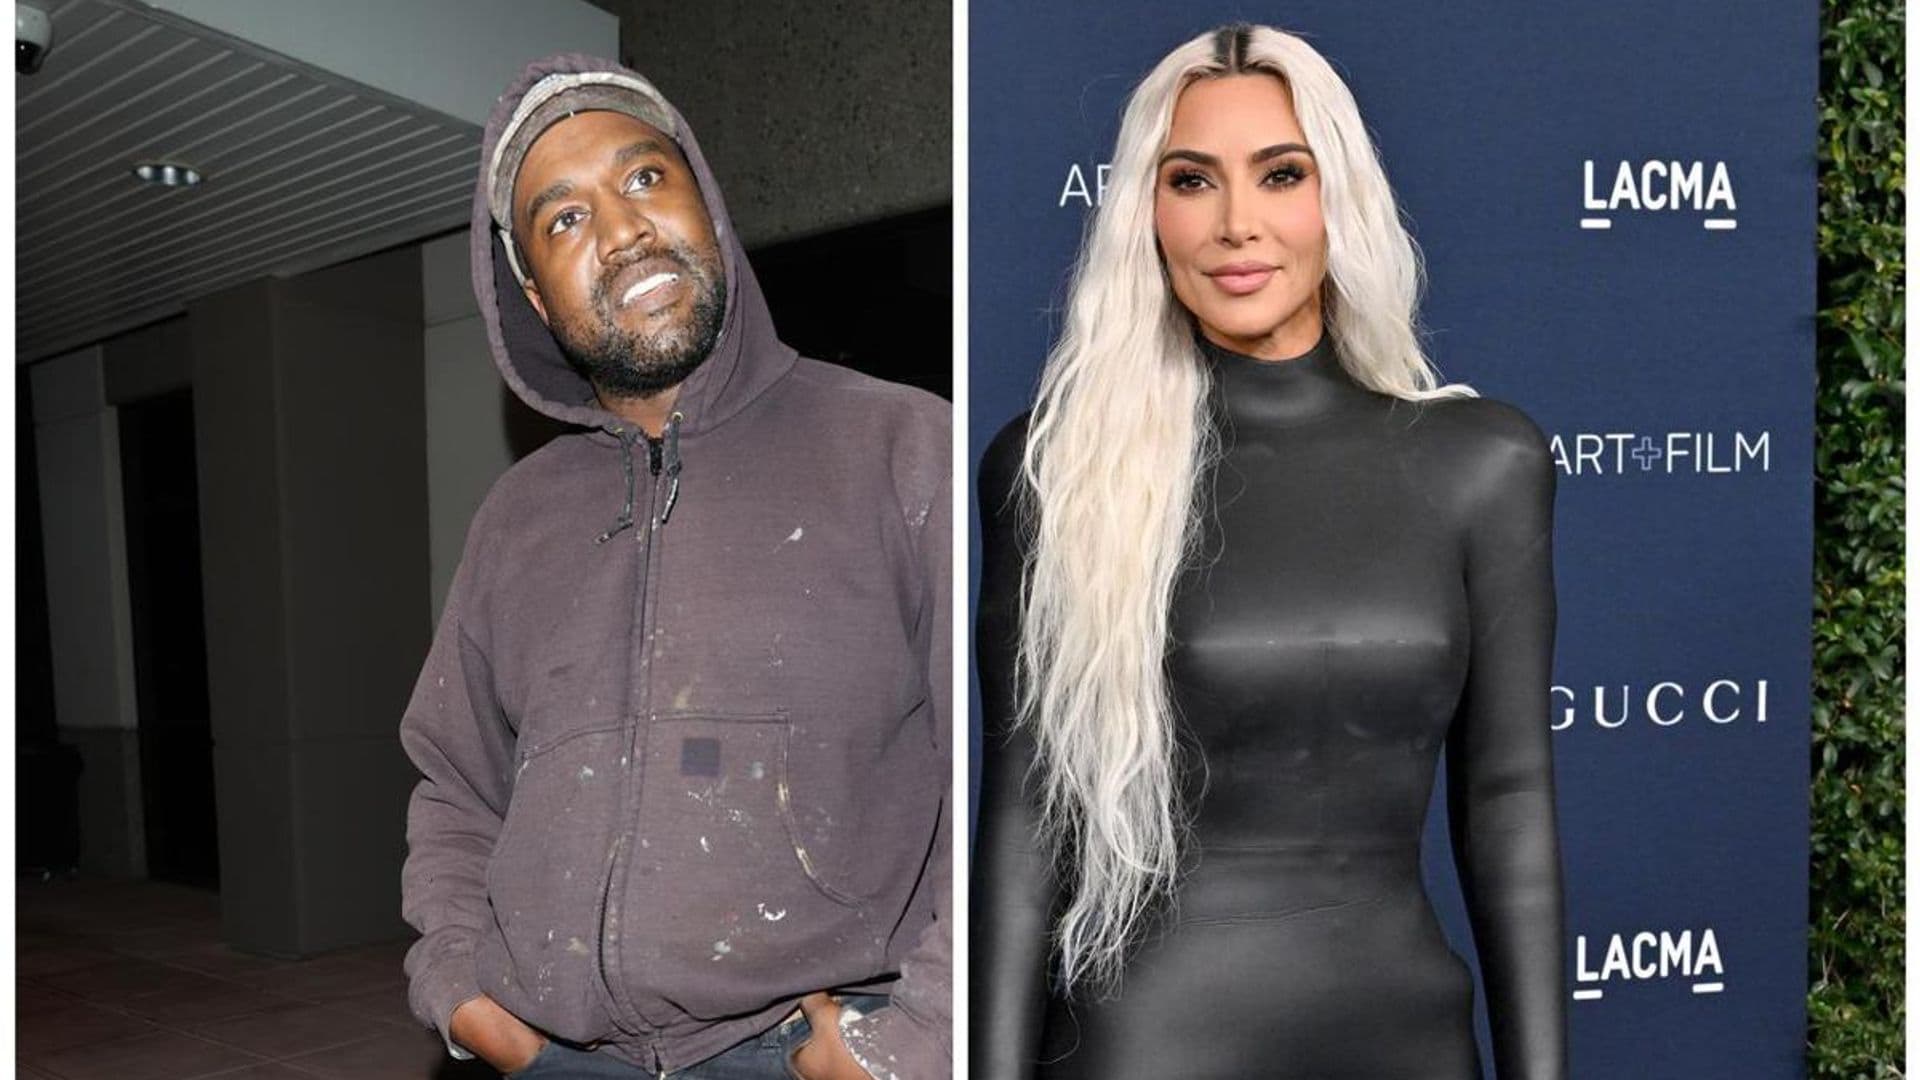 Kim Kardashian and Kanye West are speaking again, after communicating only through their assistants